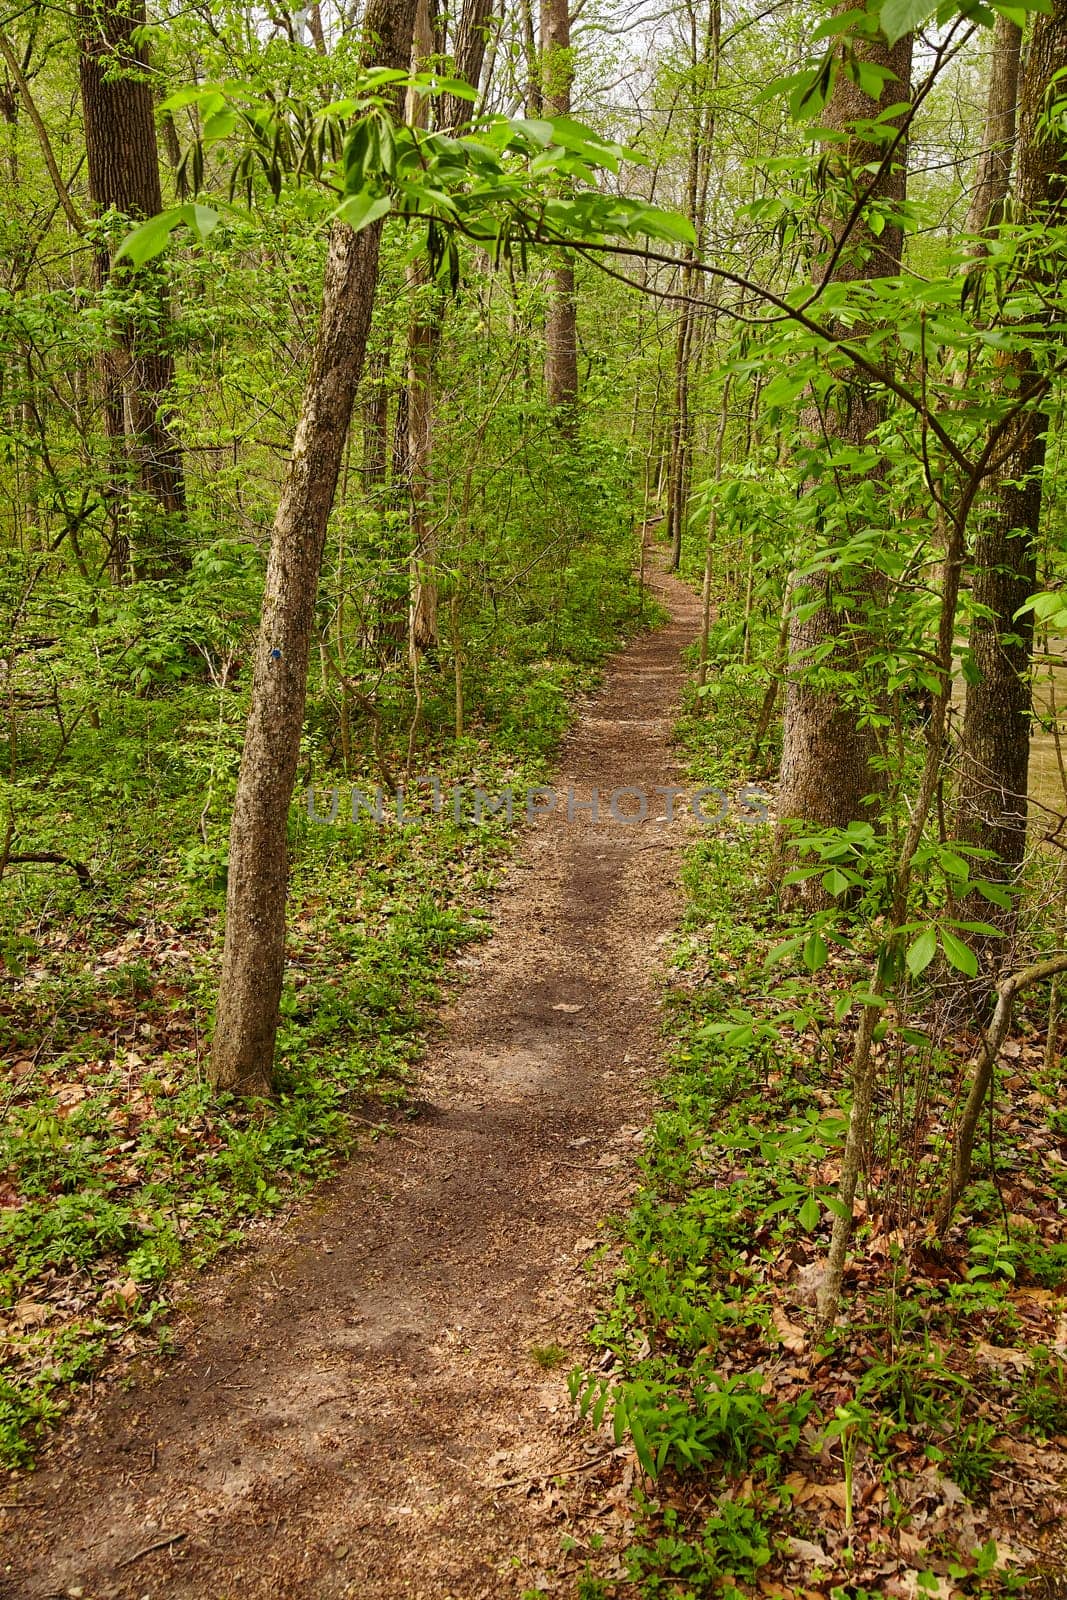 Tranquil woodland trail in the lush Bicentennial Acres Forest, Fort Wayne, Indiana, during a vibrant spring day.